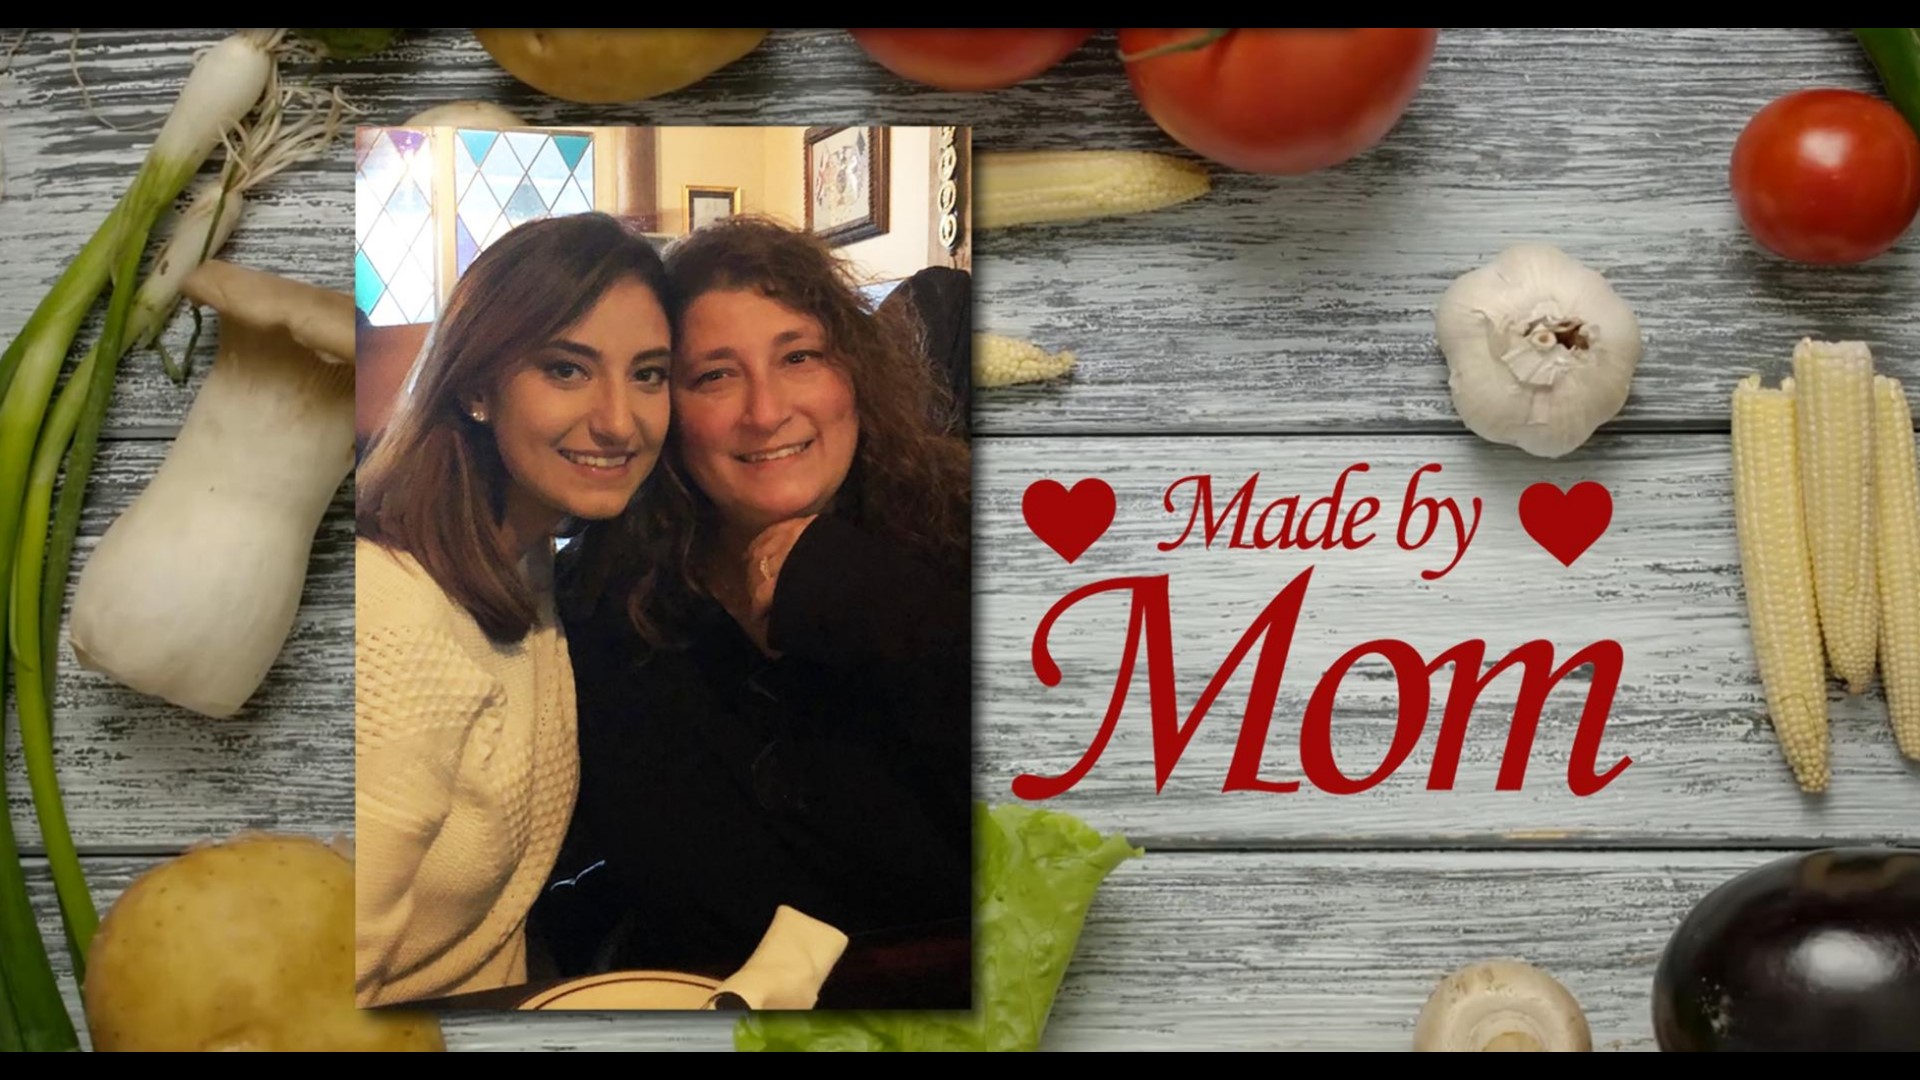 FOX61's Julia LeBlanc joins her mother and grandmother to make the family's meatball recipe!